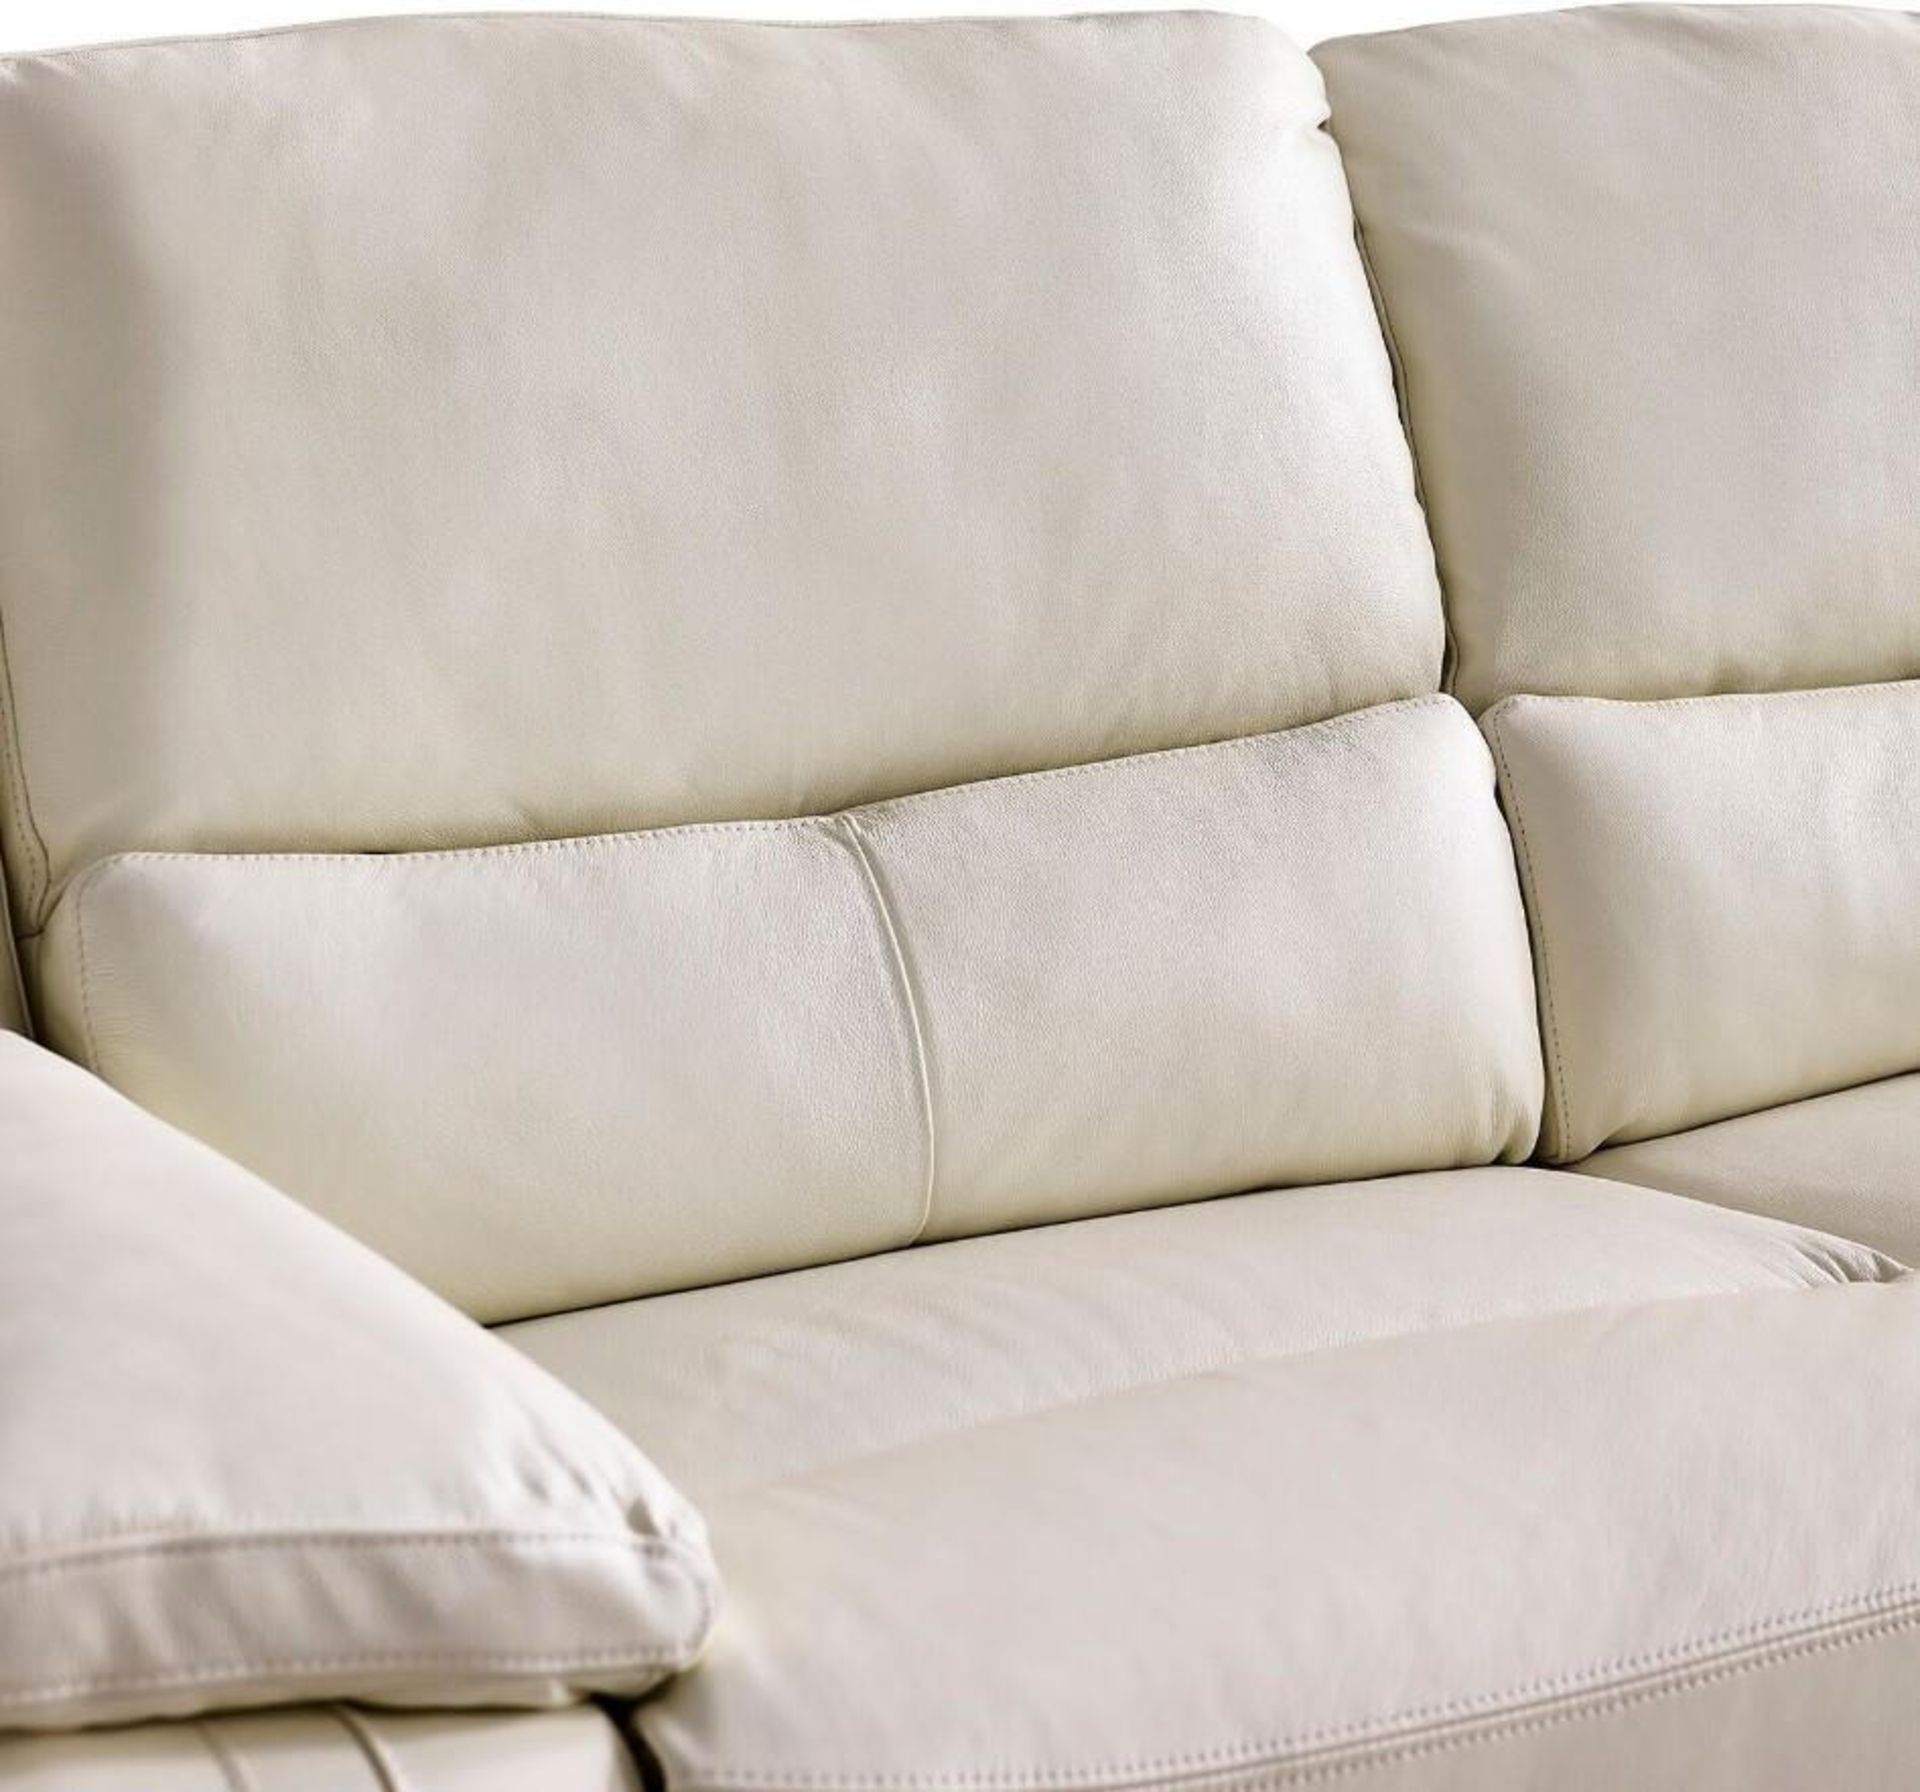 Brand new and boxed SCS Fallon 3 + 2 static sofa in Cream. - Image 2 of 2